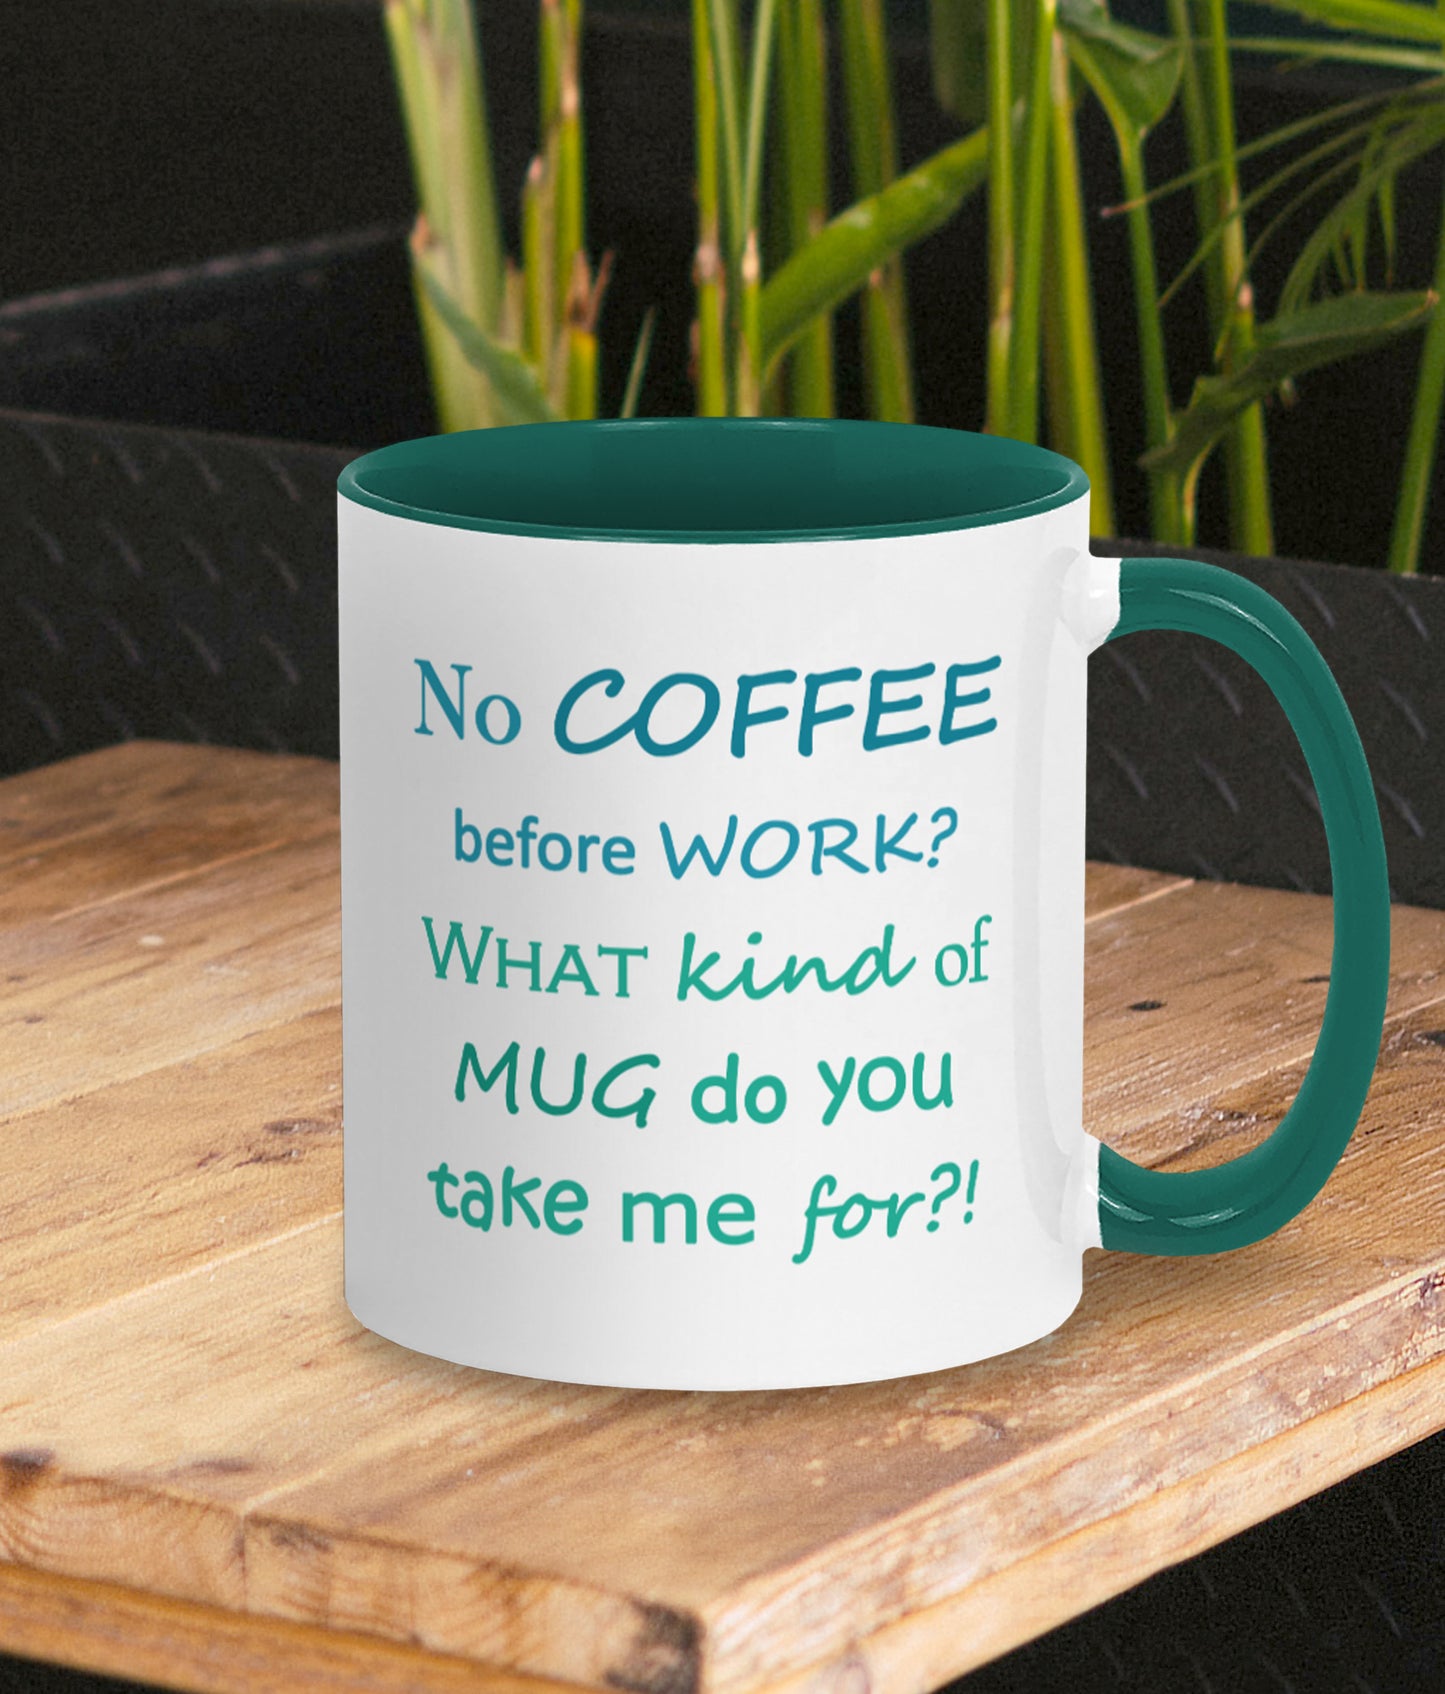 Amusing mug for the office to gift a work bestie. White mug with dark green inner and handle. Two tone green text on mug reads silly words No COFFEE before WORK? WHAT kind of MUG do you take me for?!